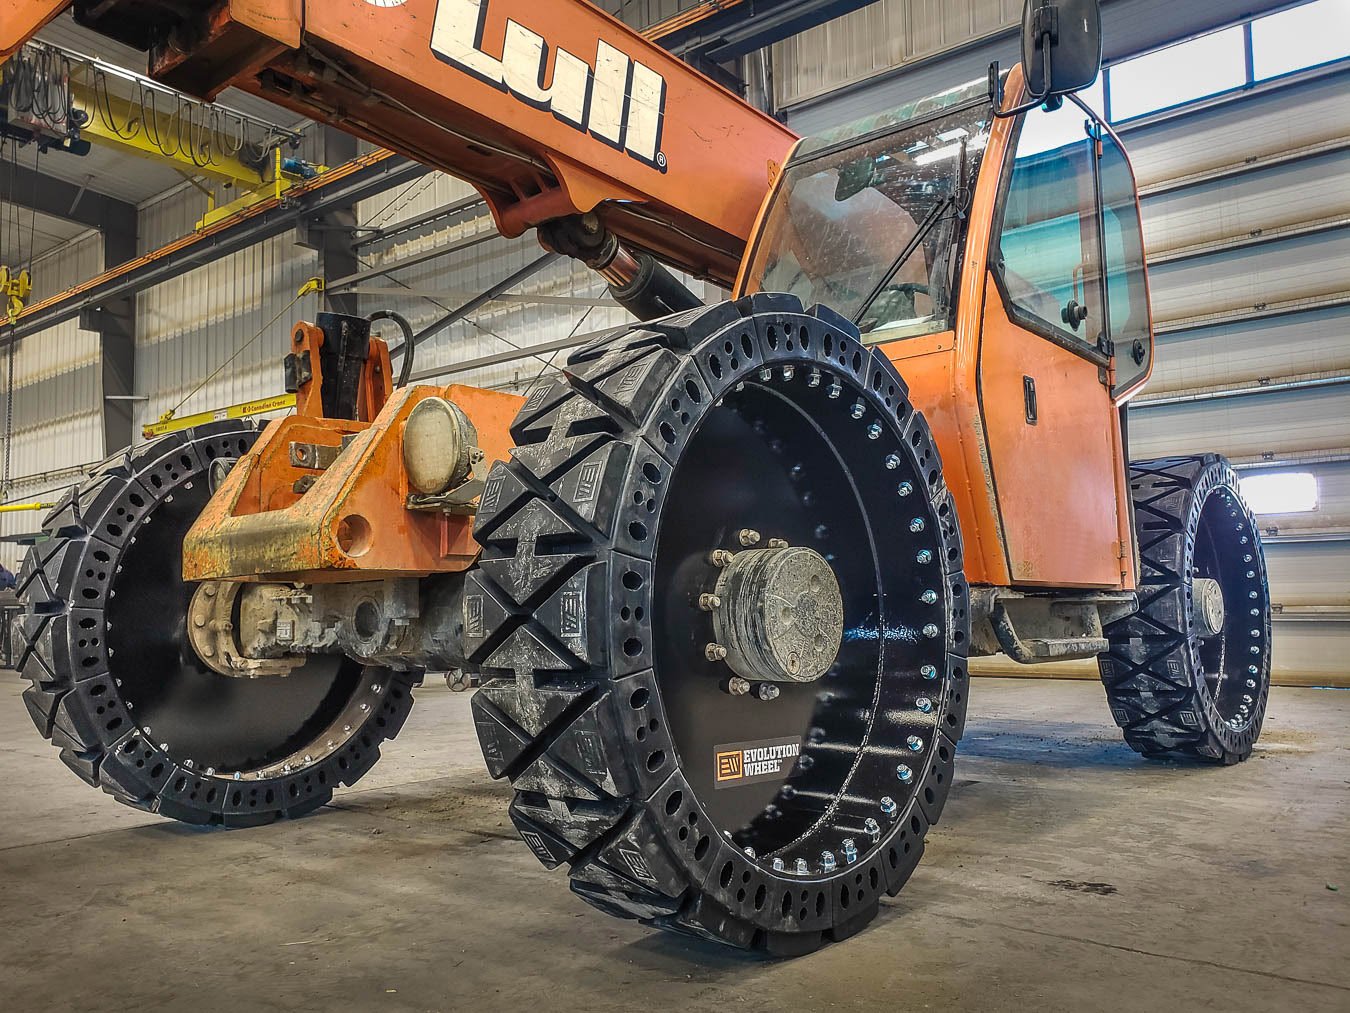 This picture shows a solid telehandler tire on an orange Lull telehandler